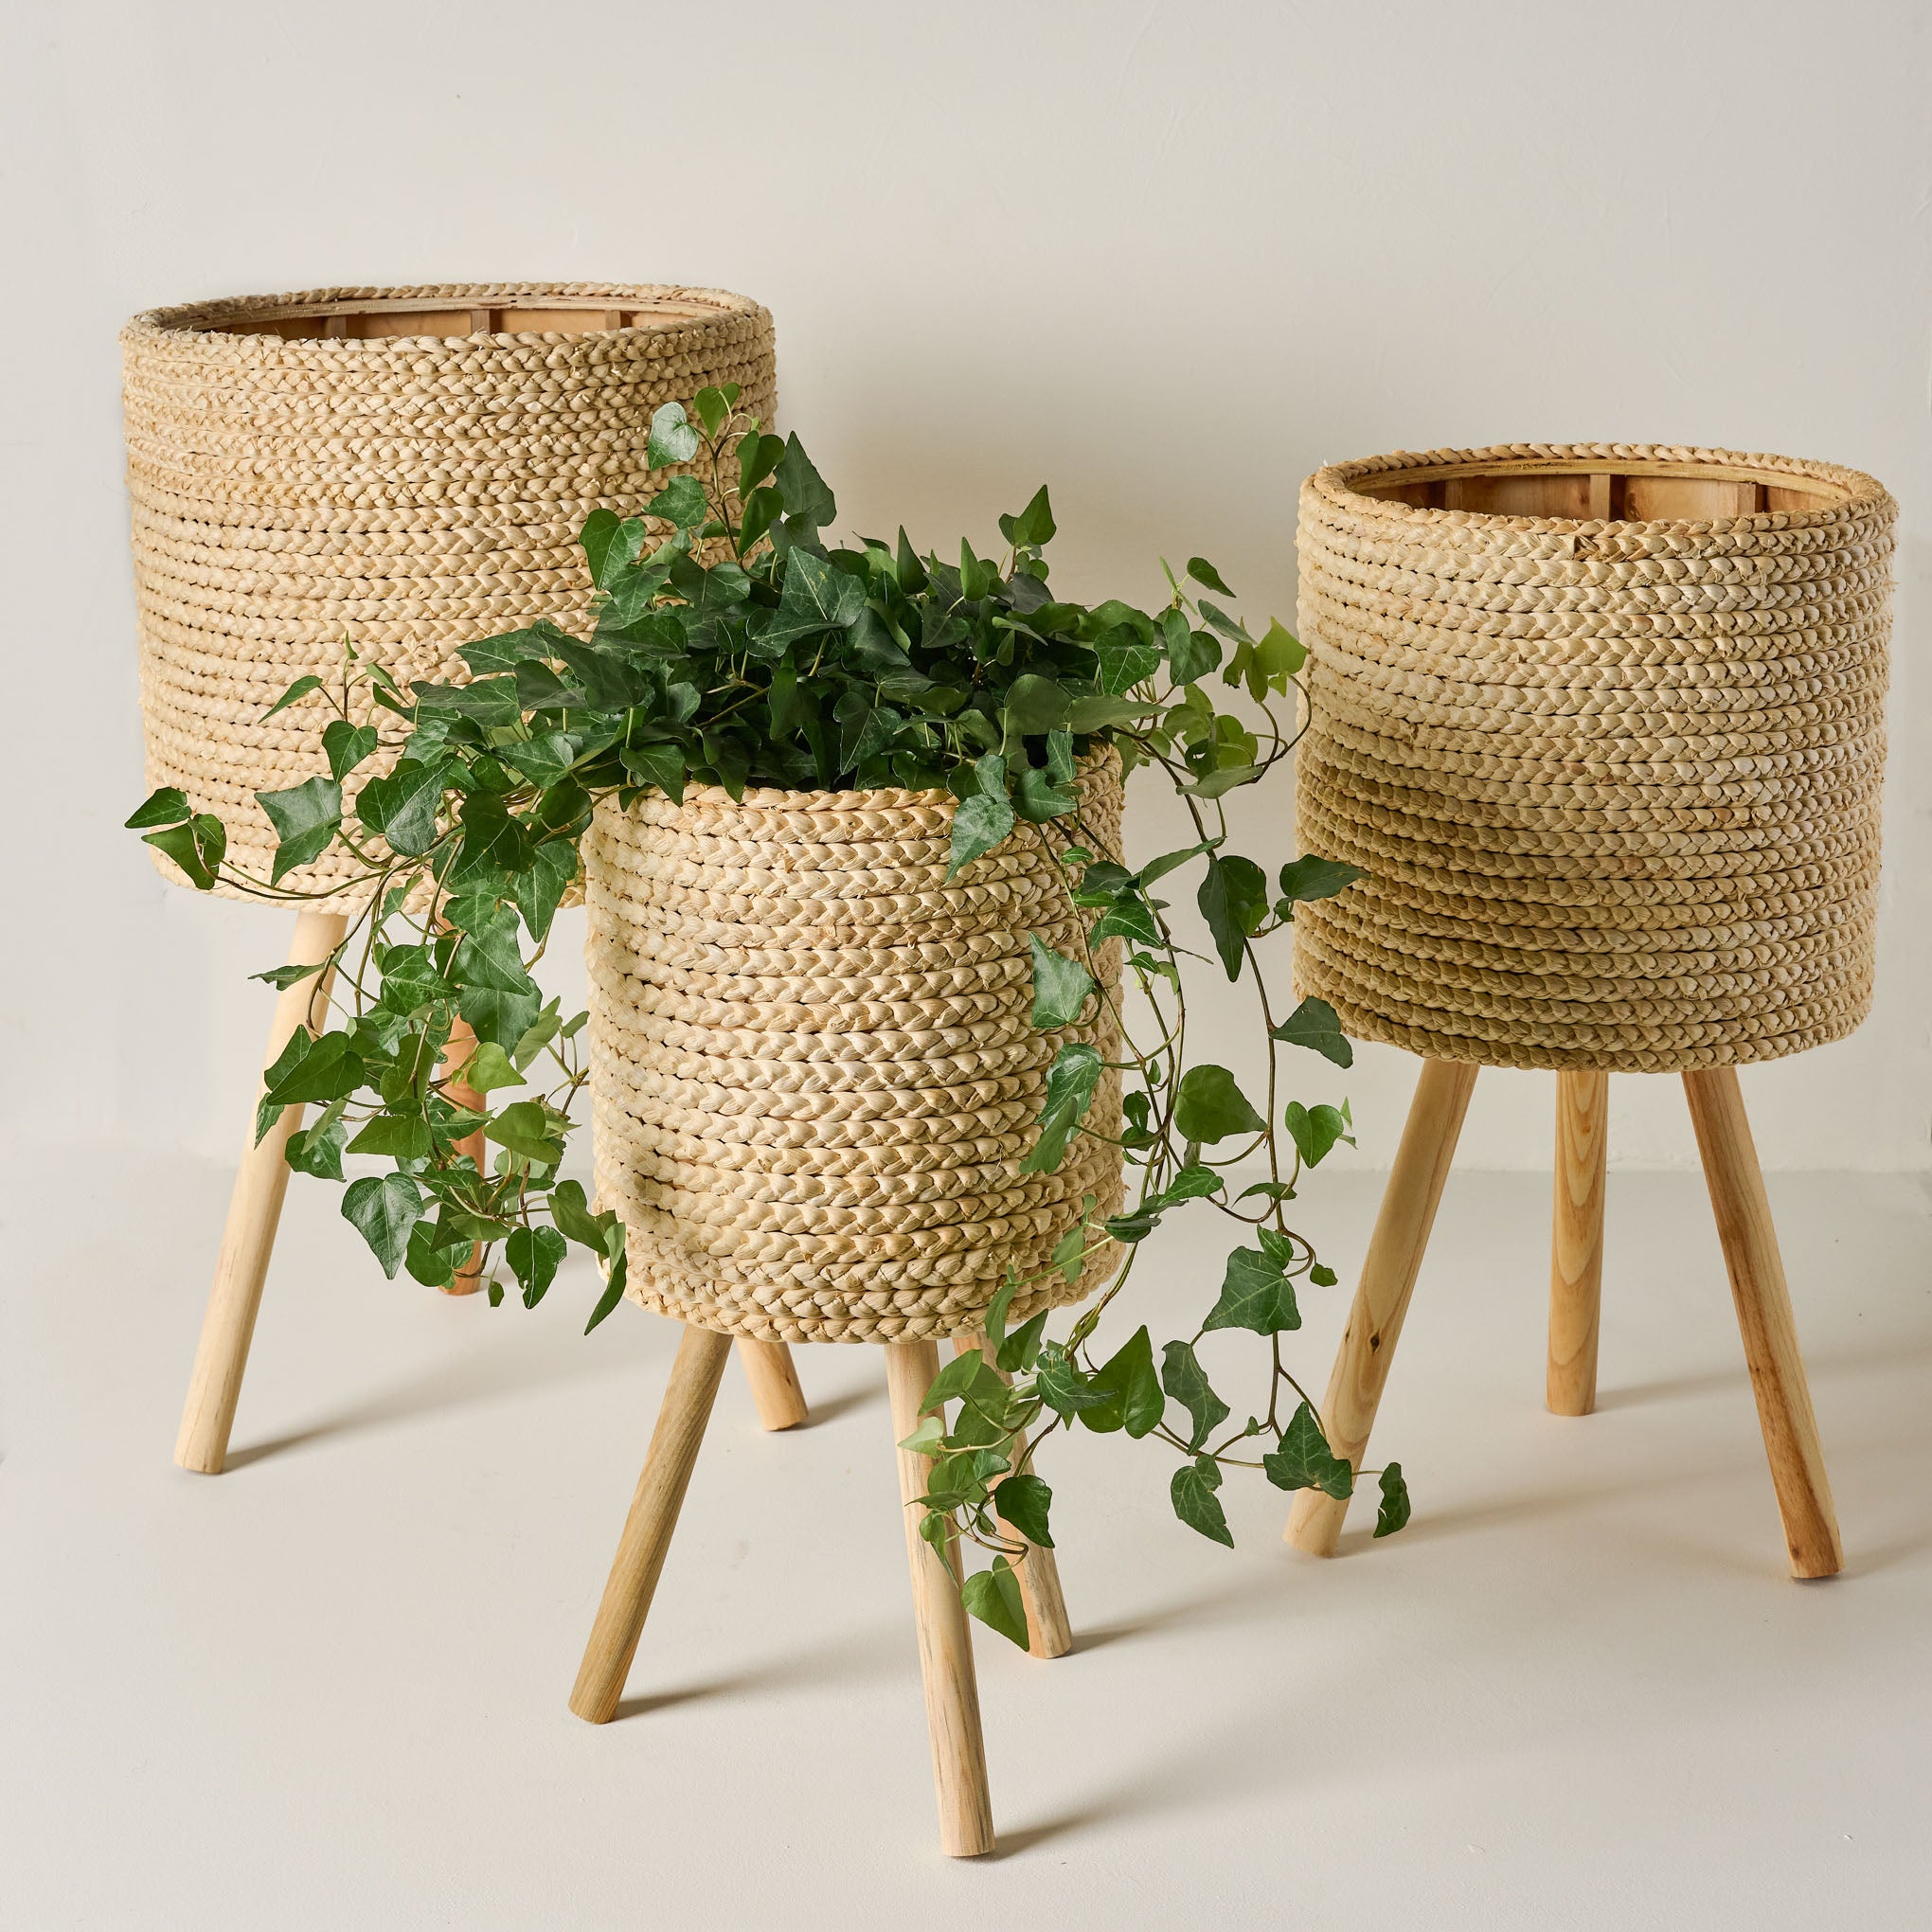 Bleached Woven Plant Stands in all three sizes with a plant $38.00